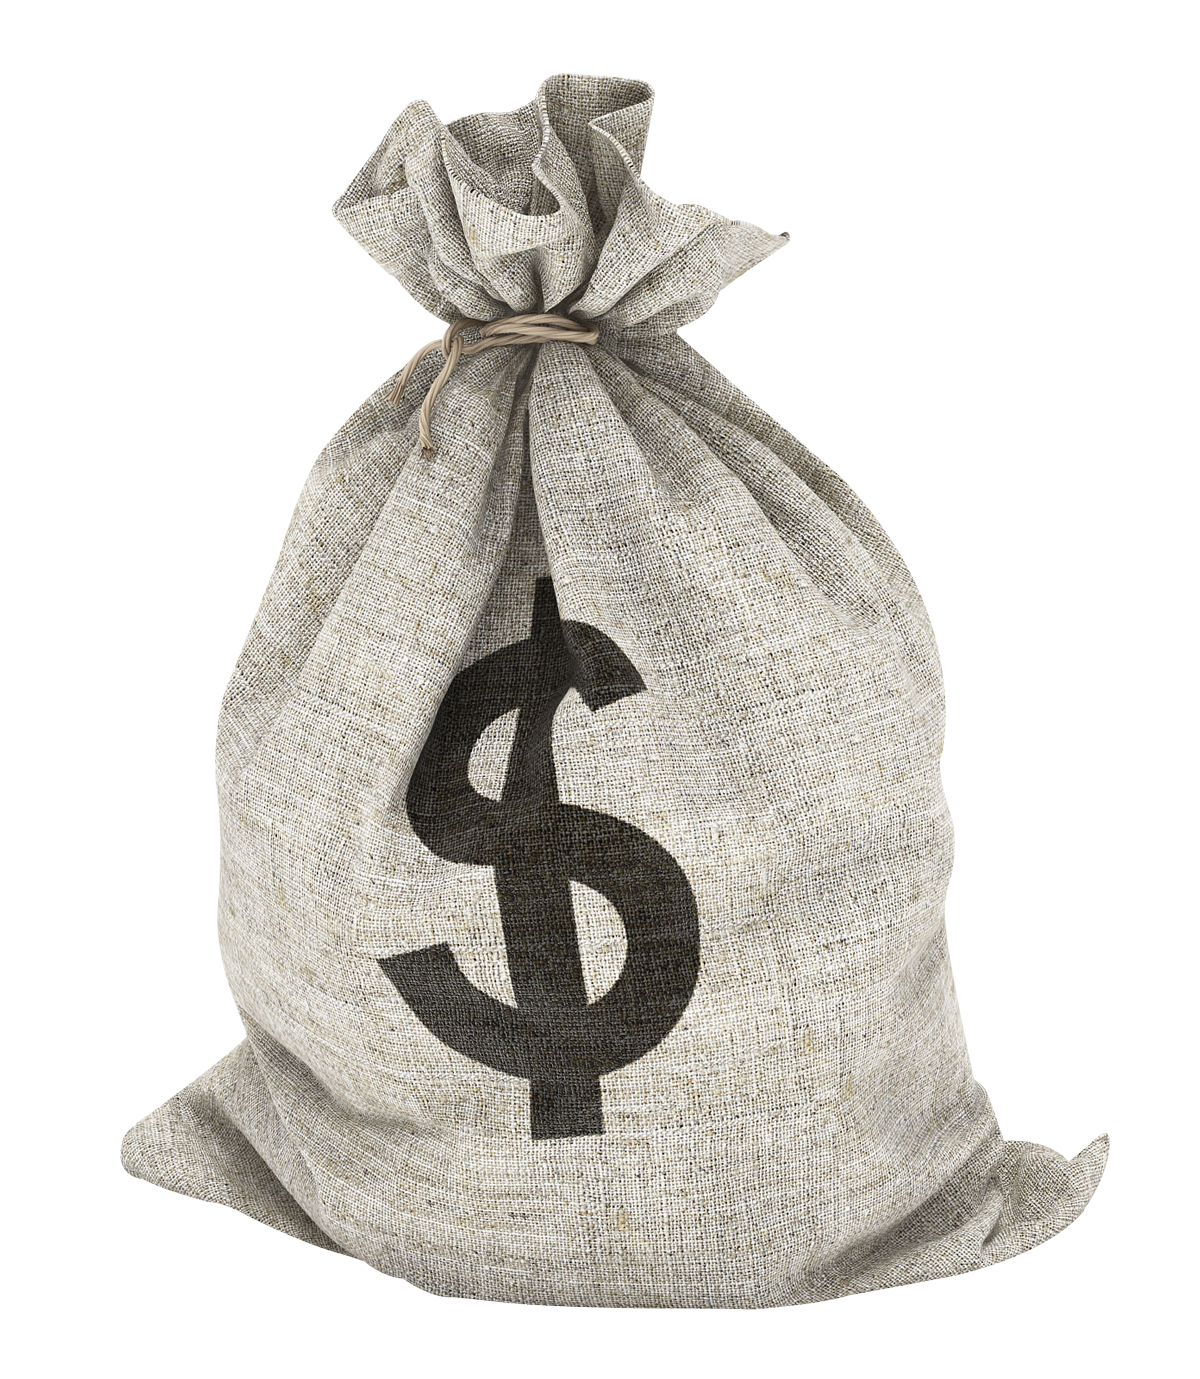 Download Money Bag Picture HQ PNG Image